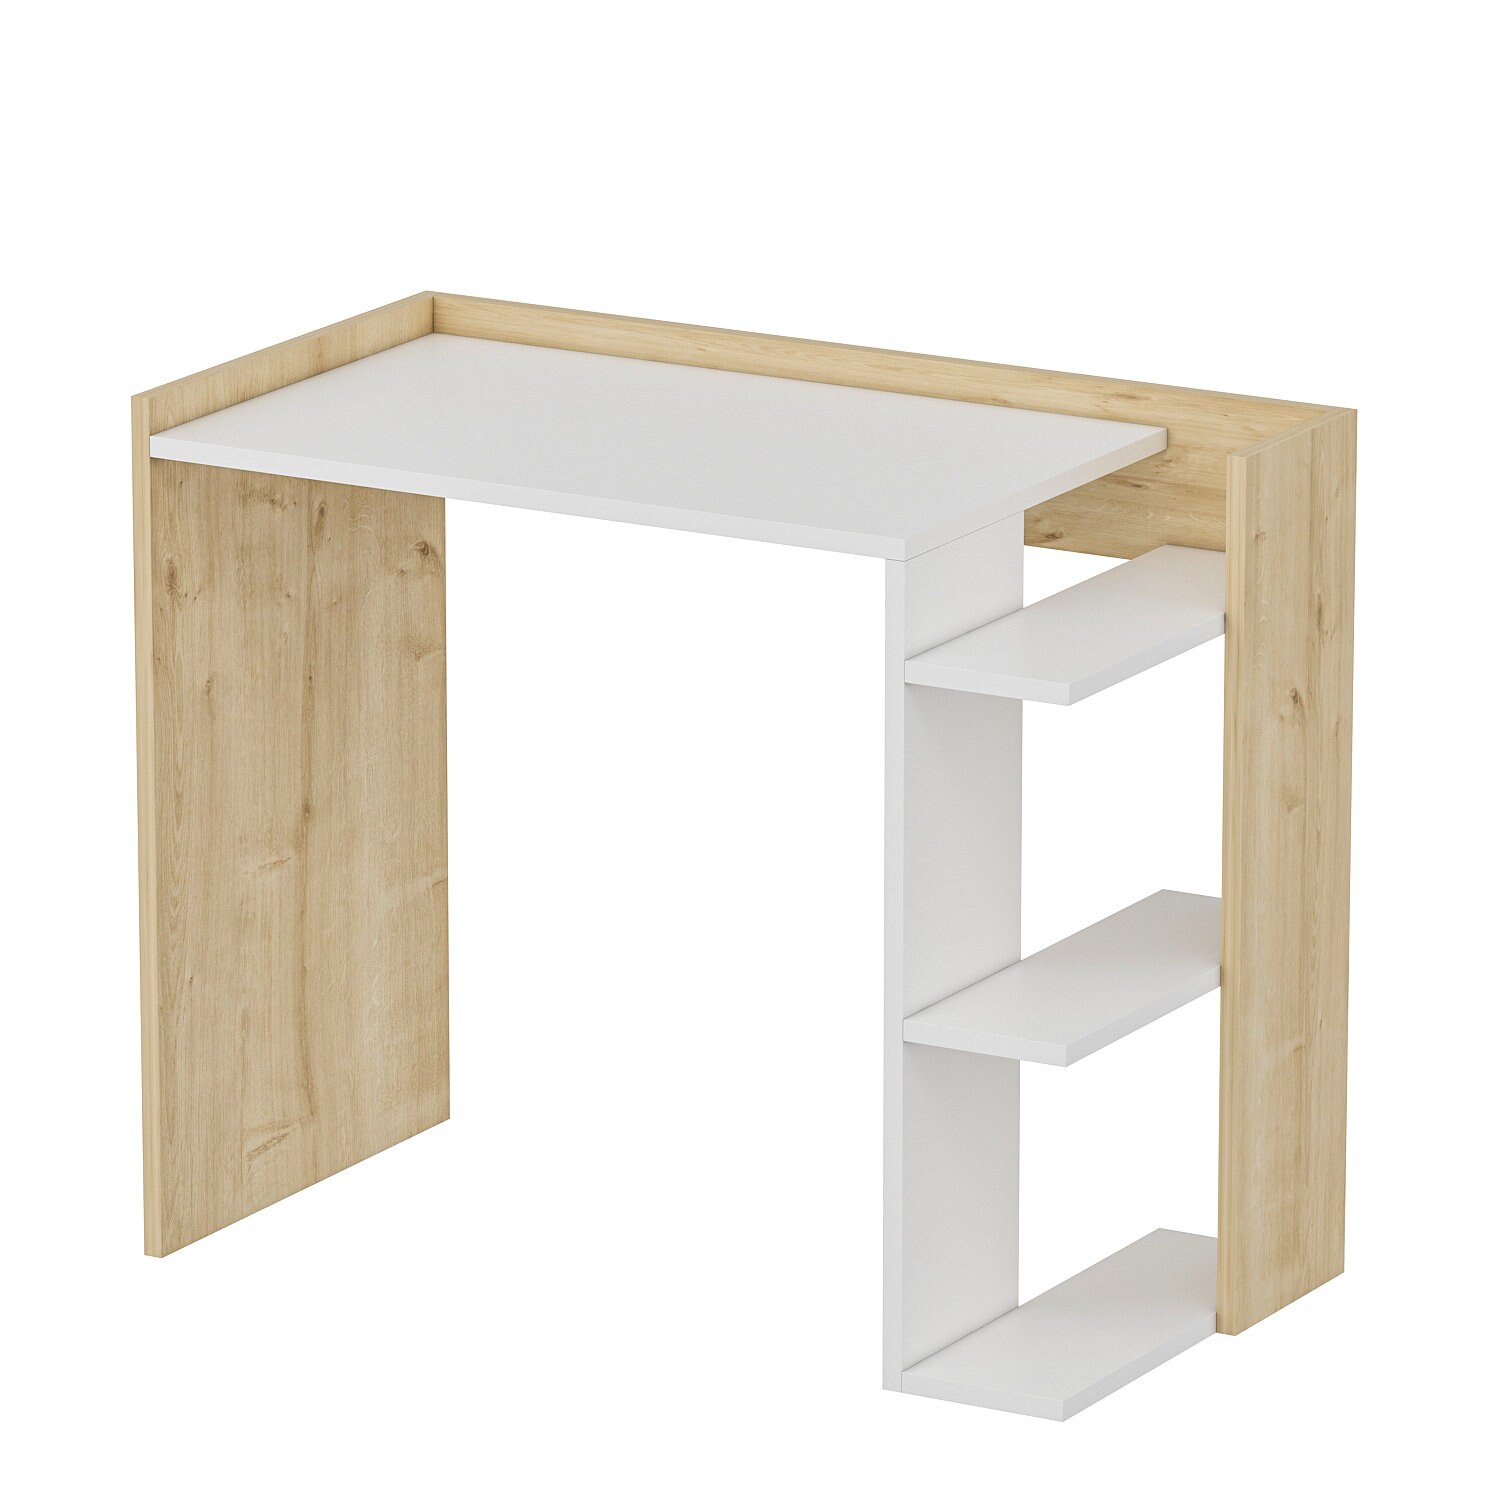 KayRana Ruby White and Oak Study Desk with Storage Space – The Latest ...